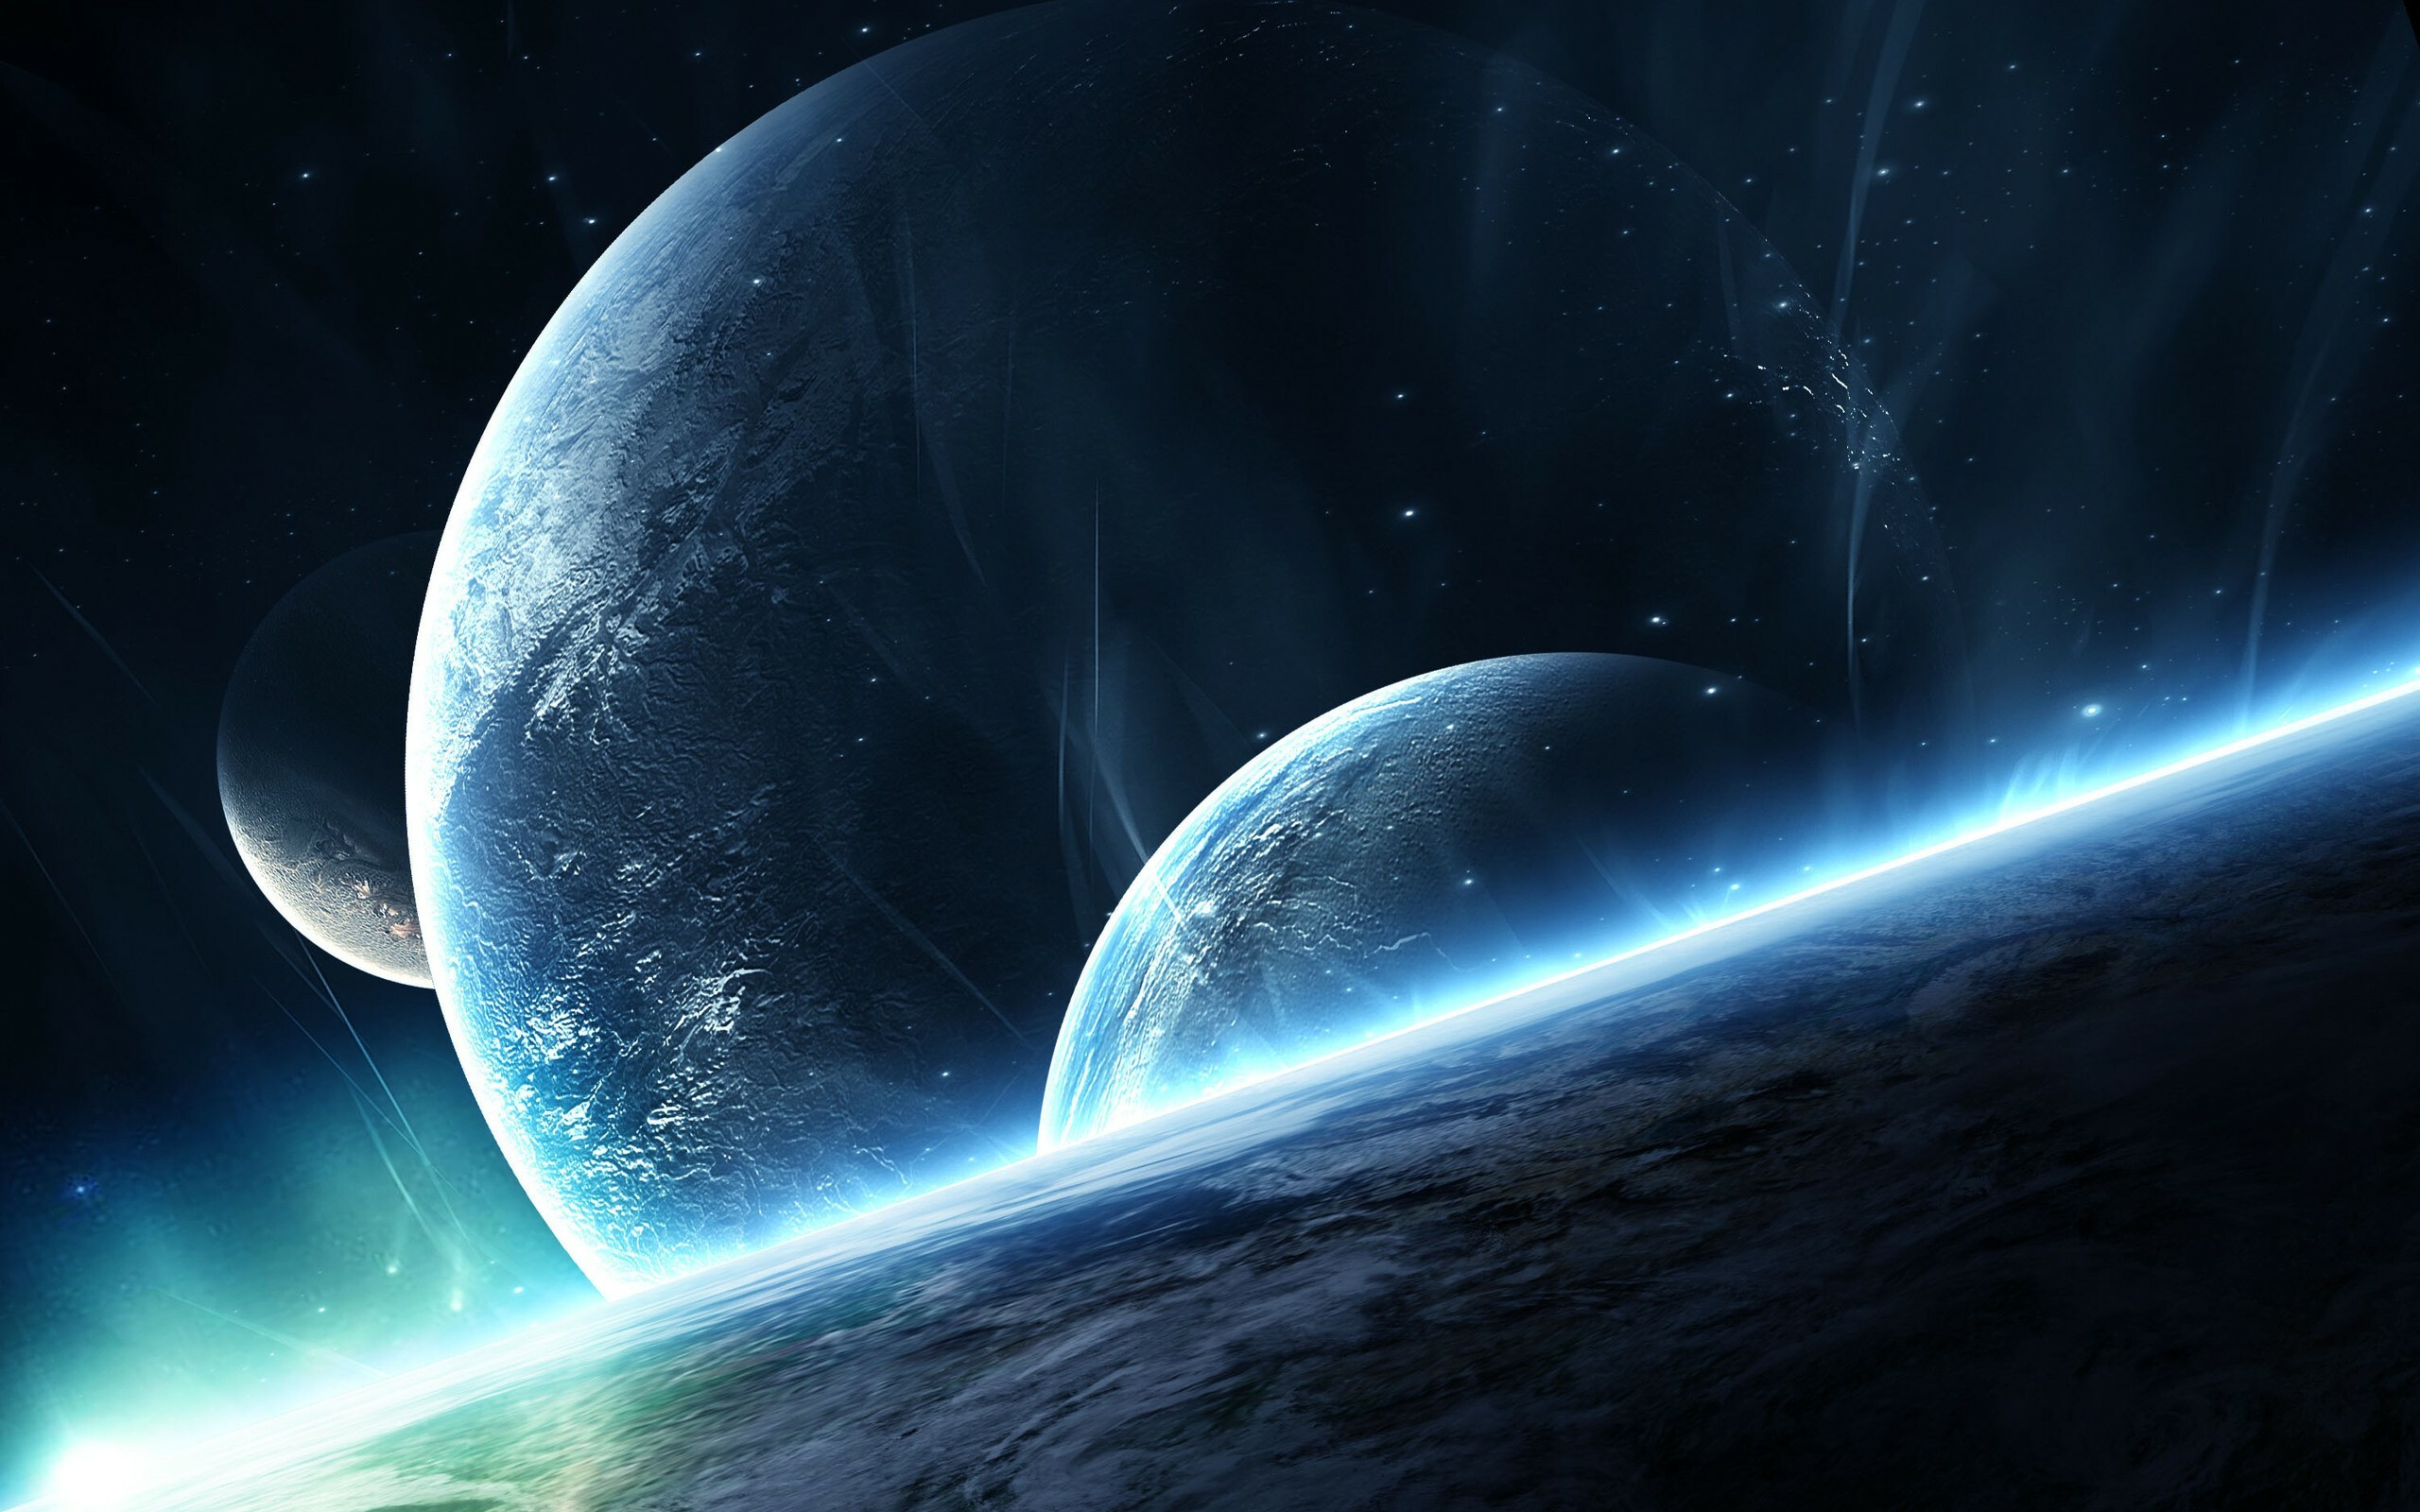 Outer Space: Universe, A galactic filamentary structure, Planets, Atmosphere. 2560x1600 HD Wallpaper.